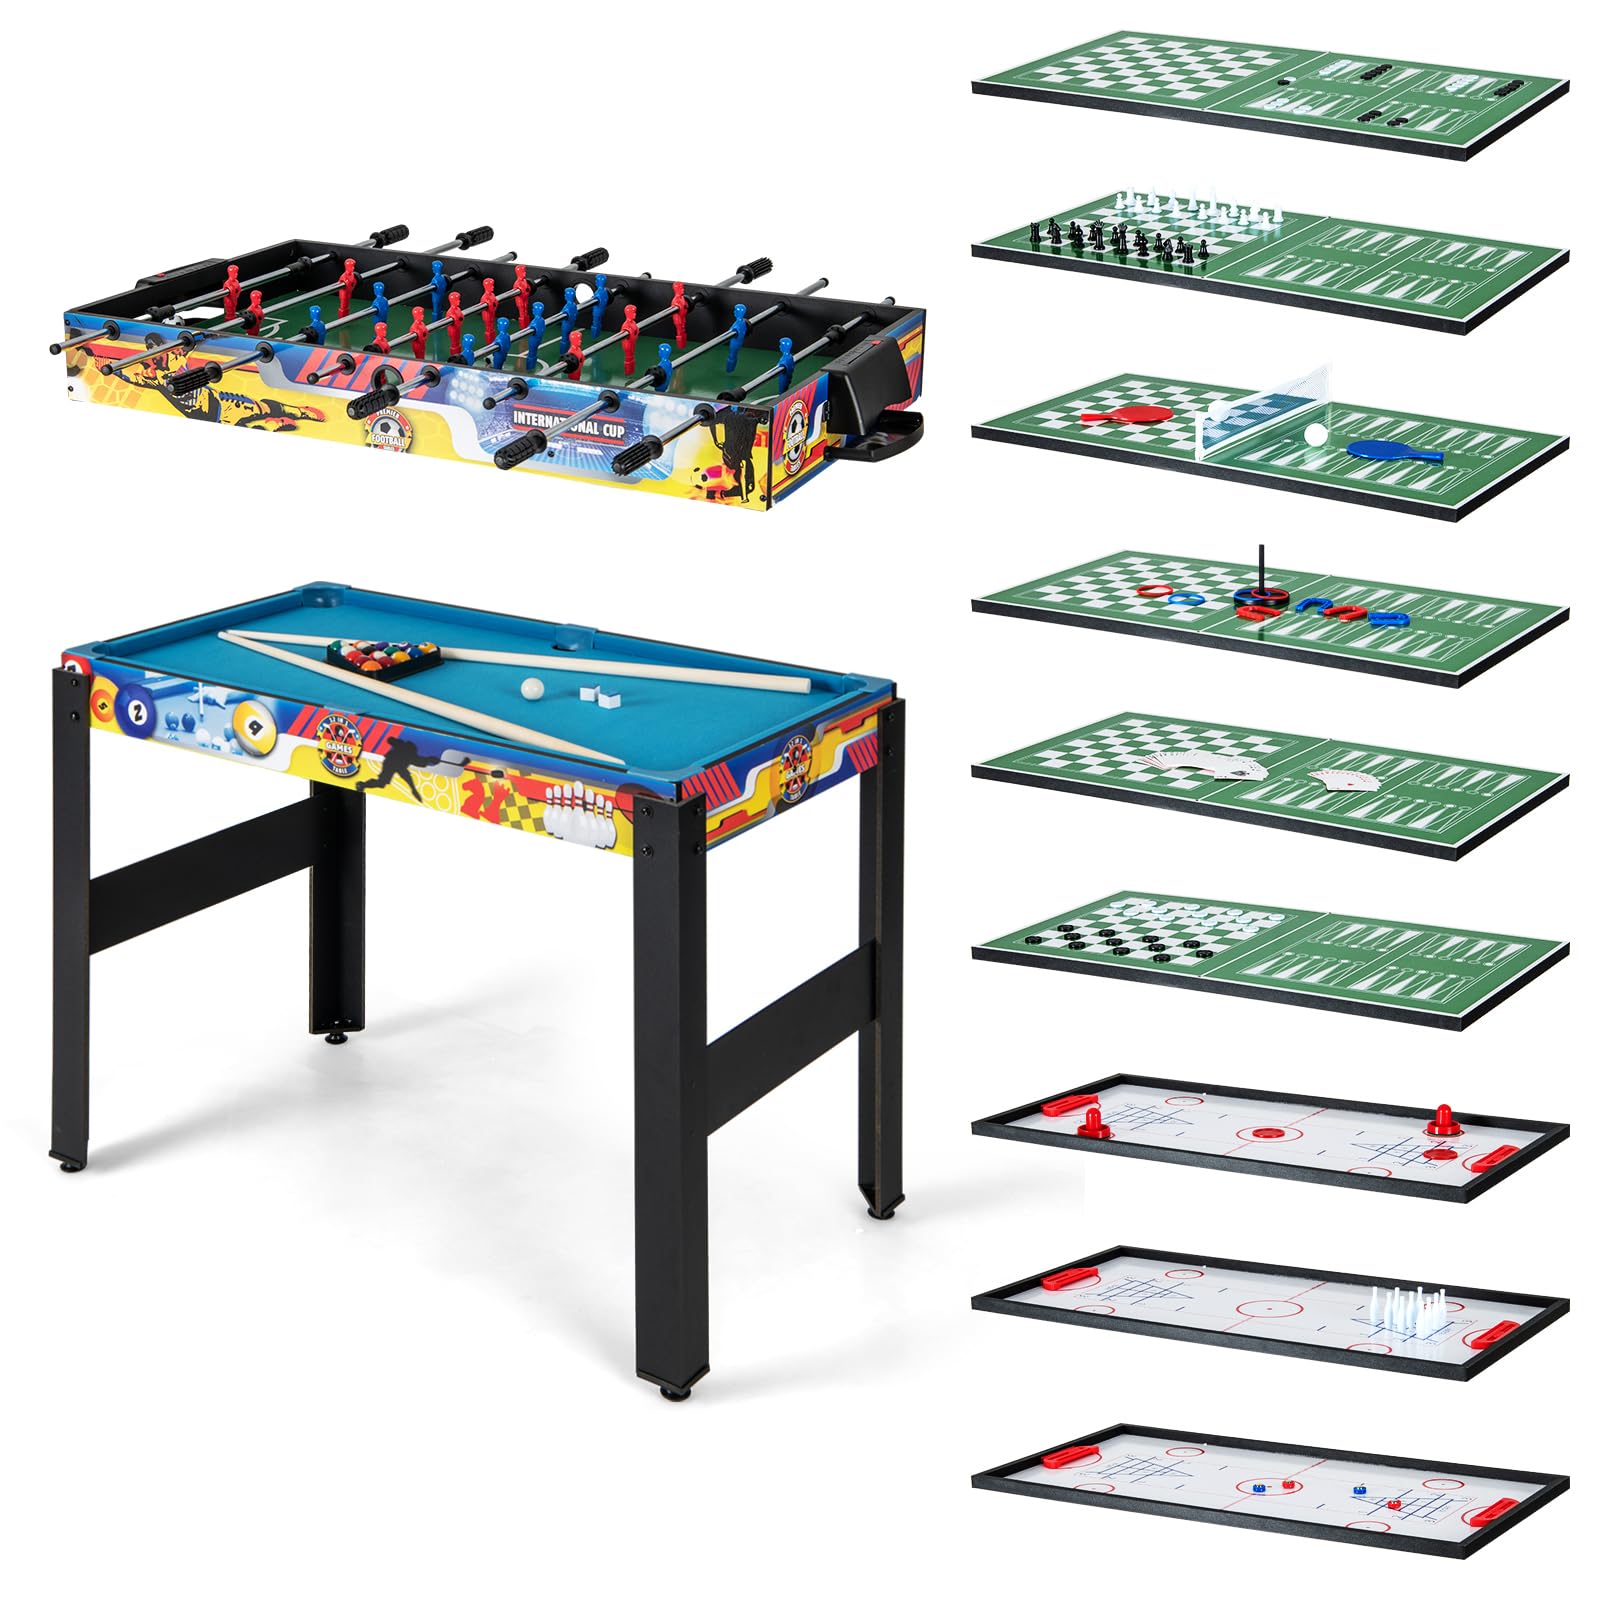 Giantex 12-in-1 Multi Game Table, 48 Inch Combination Game Tables with Foosball, Hockey, Ping Pong, Pool, Chess, Bowling, Checkers, Shuffleboard